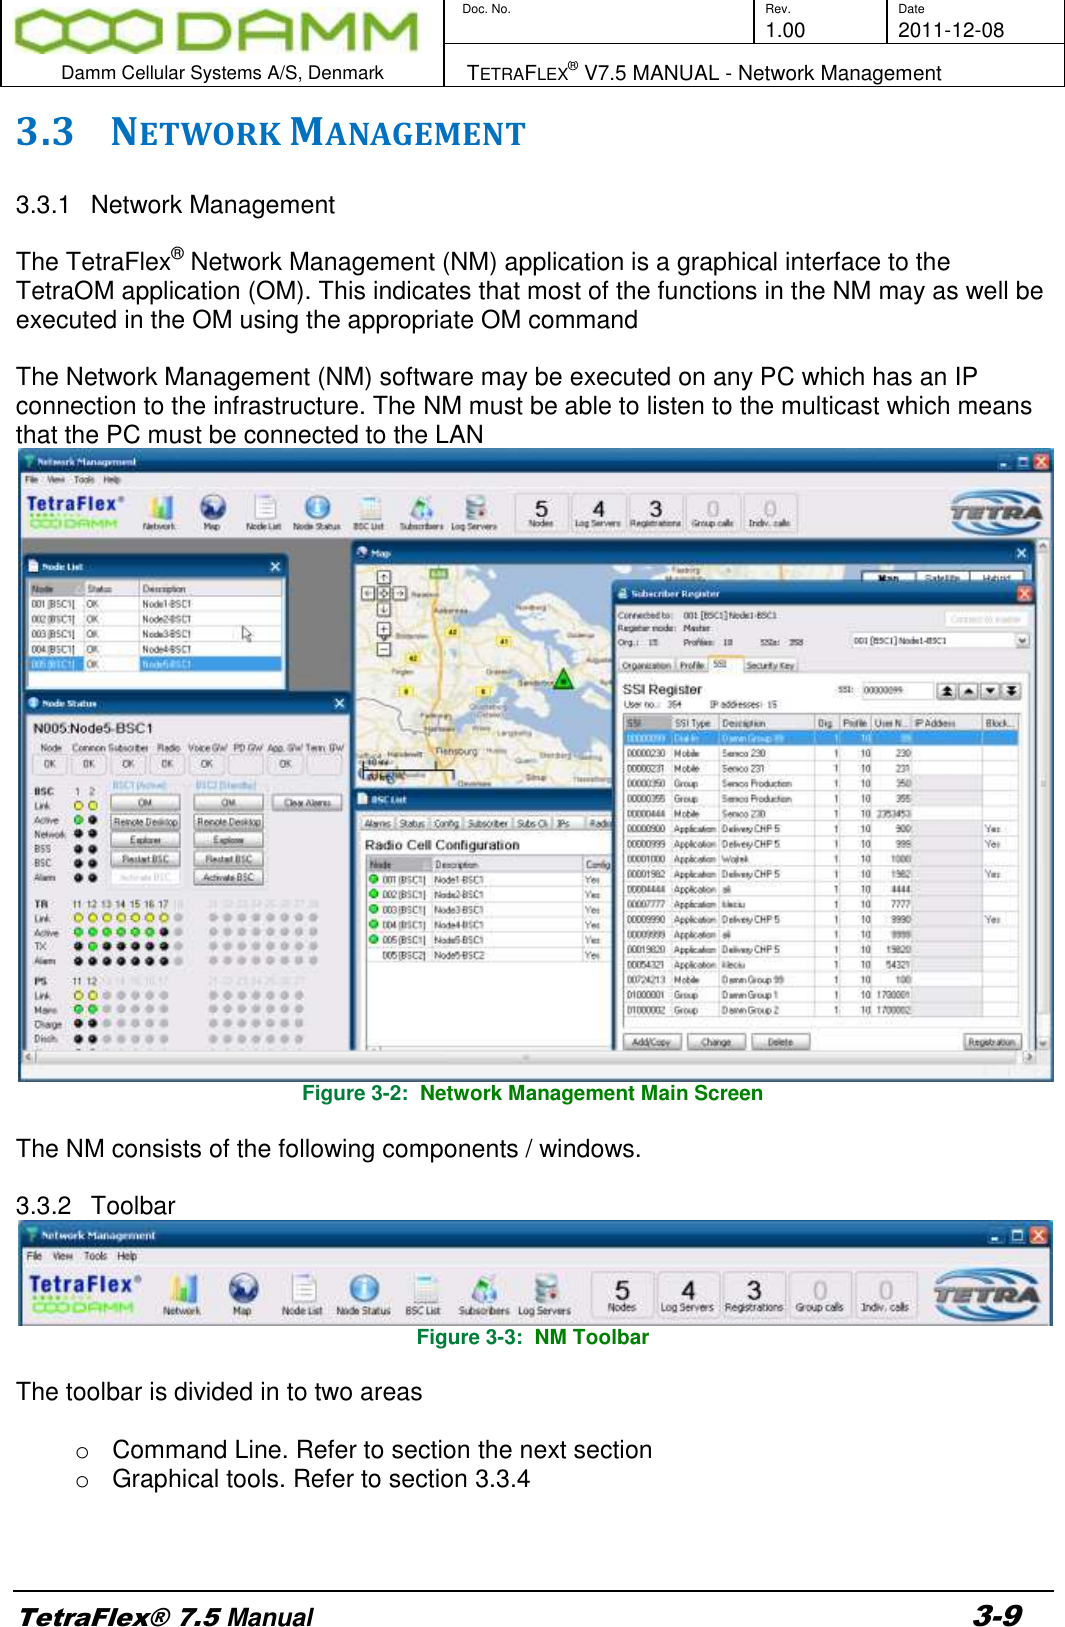        Doc. No. Rev. Date     1.00 2011-12-08  Damm Cellular Systems A/S, Denmark   TETRAFLEX® V7.5 MANUAL - Network Management  TetraFlex® 7.5 Manual 3-9 3.3 NETWORK MANAGEMENT   3.3.1  Network Management  The TetraFlex® Network Management (NM) application is a graphical interface to the TetraOM application (OM). This indicates that most of the functions in the NM may as well be executed in the OM using the appropriate OM command  The Network Management (NM) software may be executed on any PC which has an IP connection to the infrastructure. The NM must be able to listen to the multicast which means that the PC must be connected to the LAN  Figure 3-2:  Network Management Main Screen  The NM consists of the following components / windows.  3.3.2  Toolbar  Figure 3-3:  NM Toolbar  The toolbar is divided in to two areas  o  Command Line. Refer to section the next section o  Graphical tools. Refer to section 3.3.4    